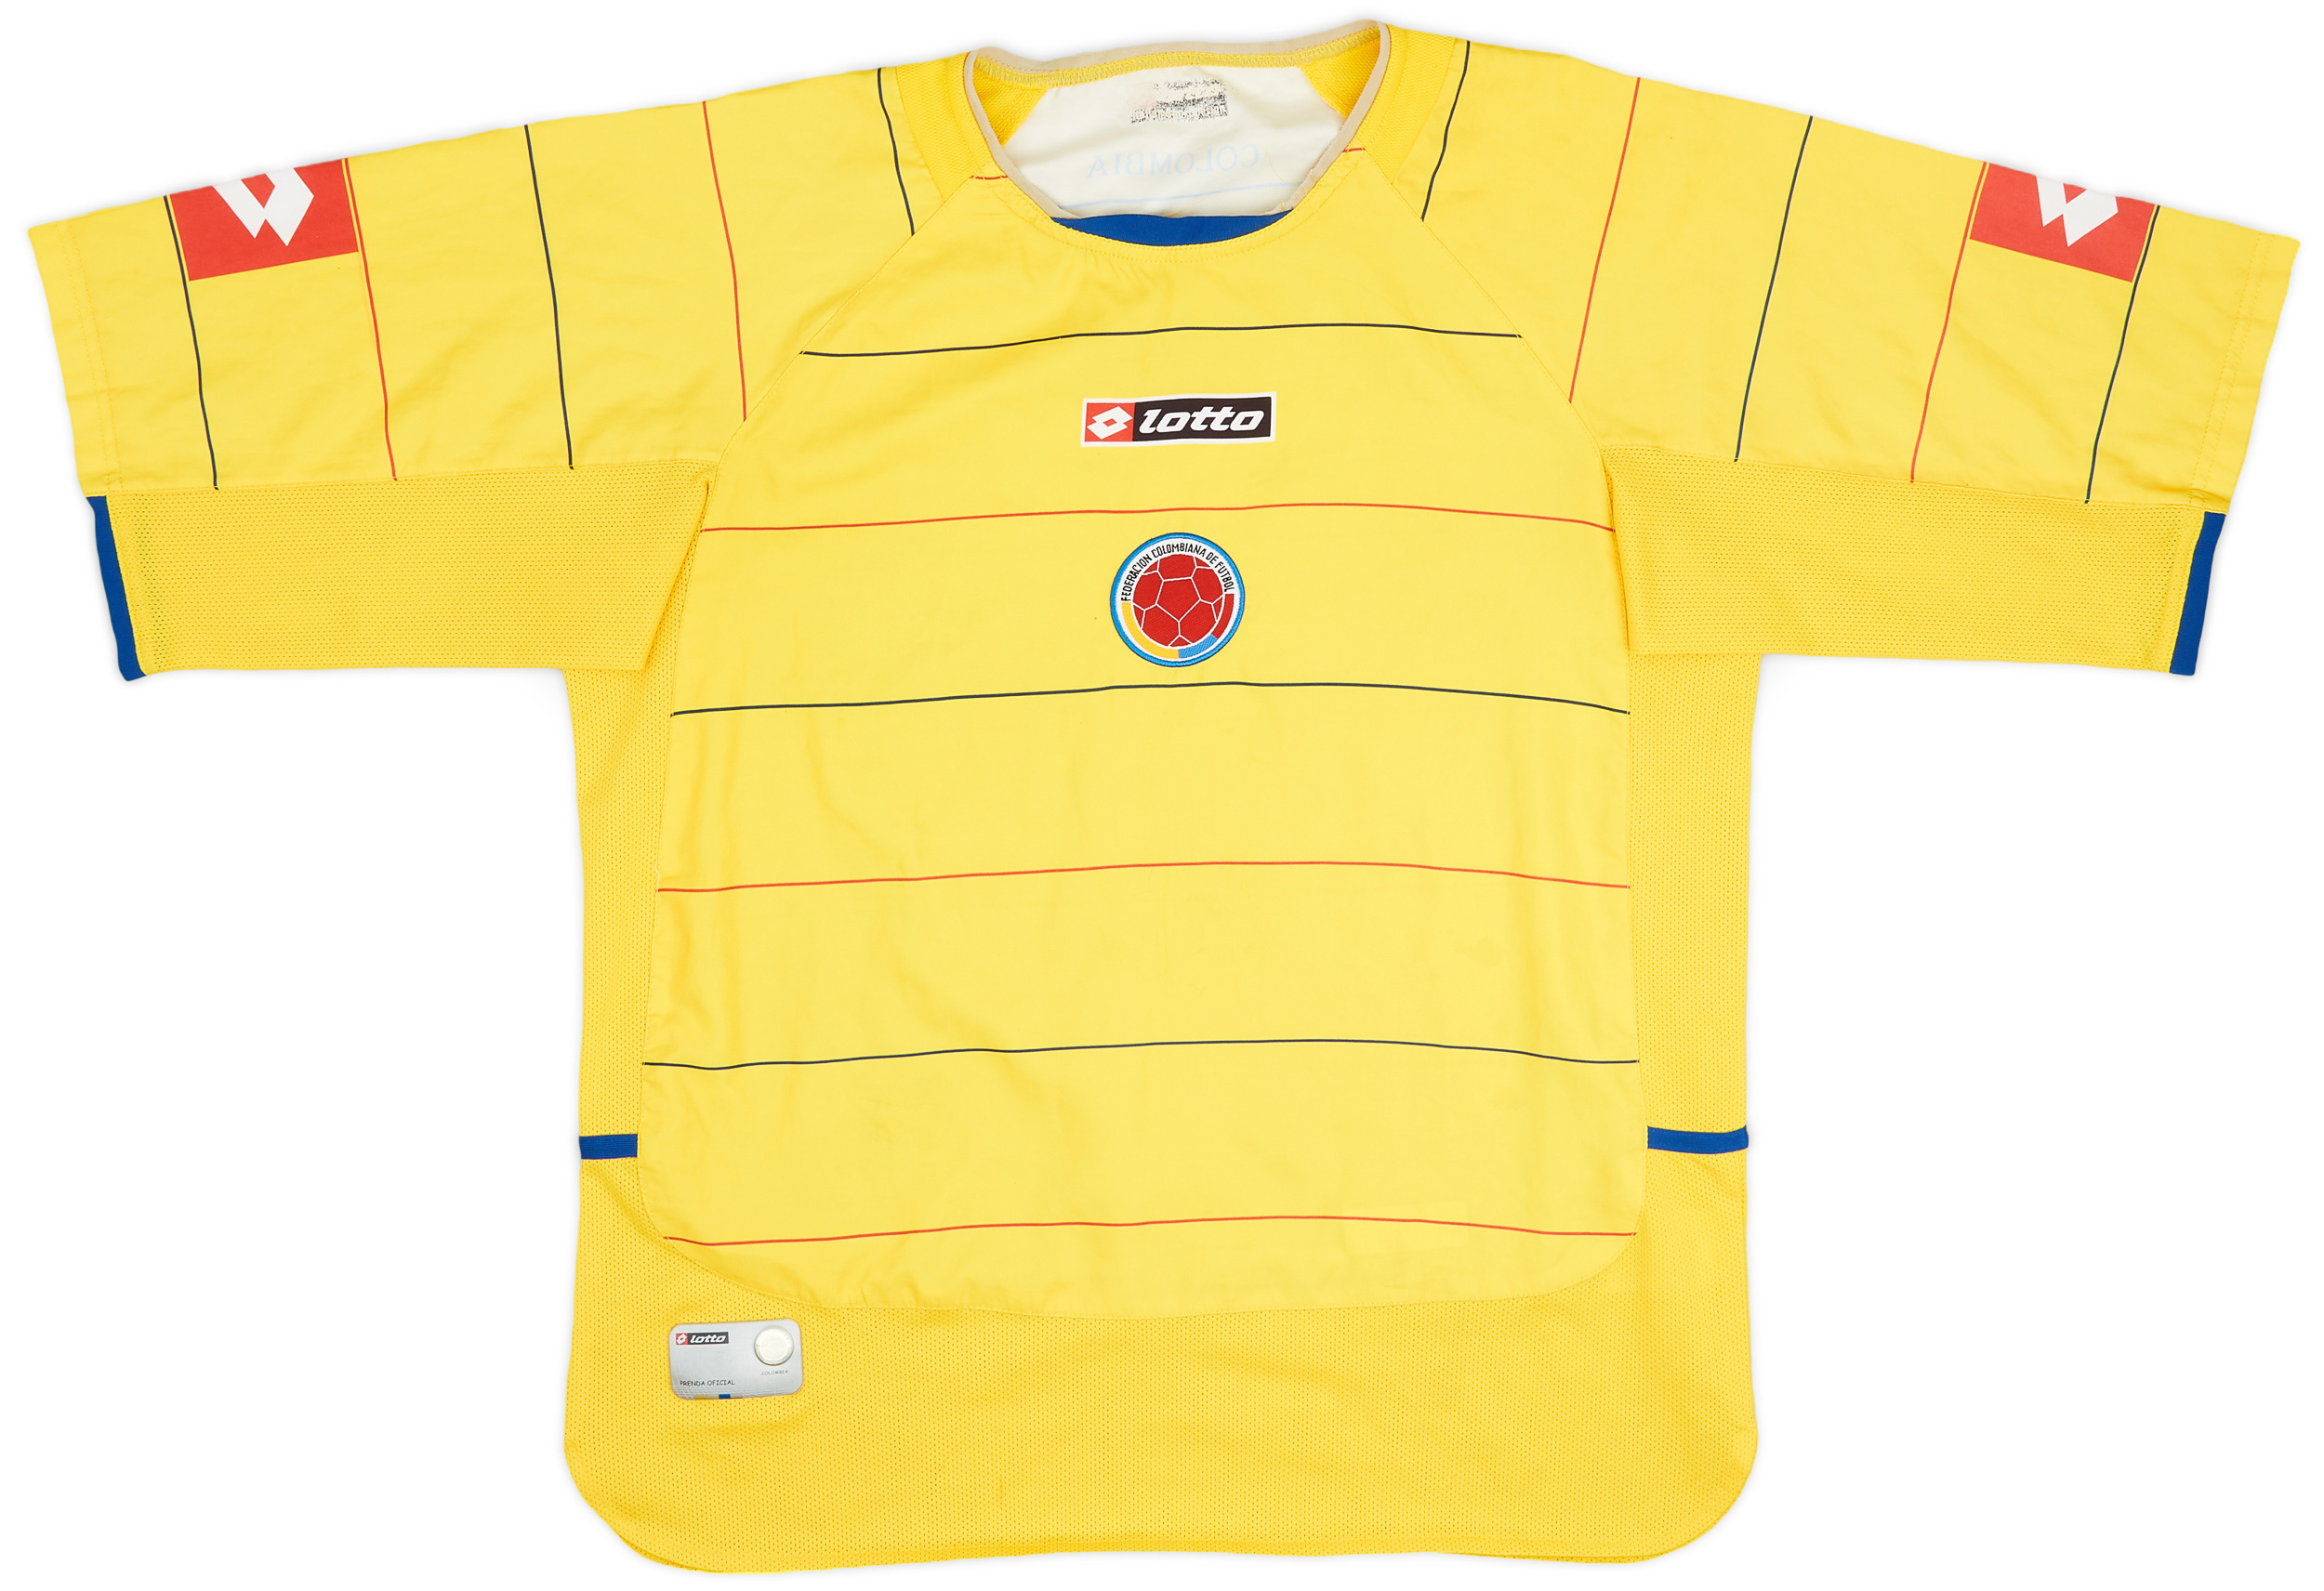 2004-06 Colombia Home Shirt - 9/10 - ()